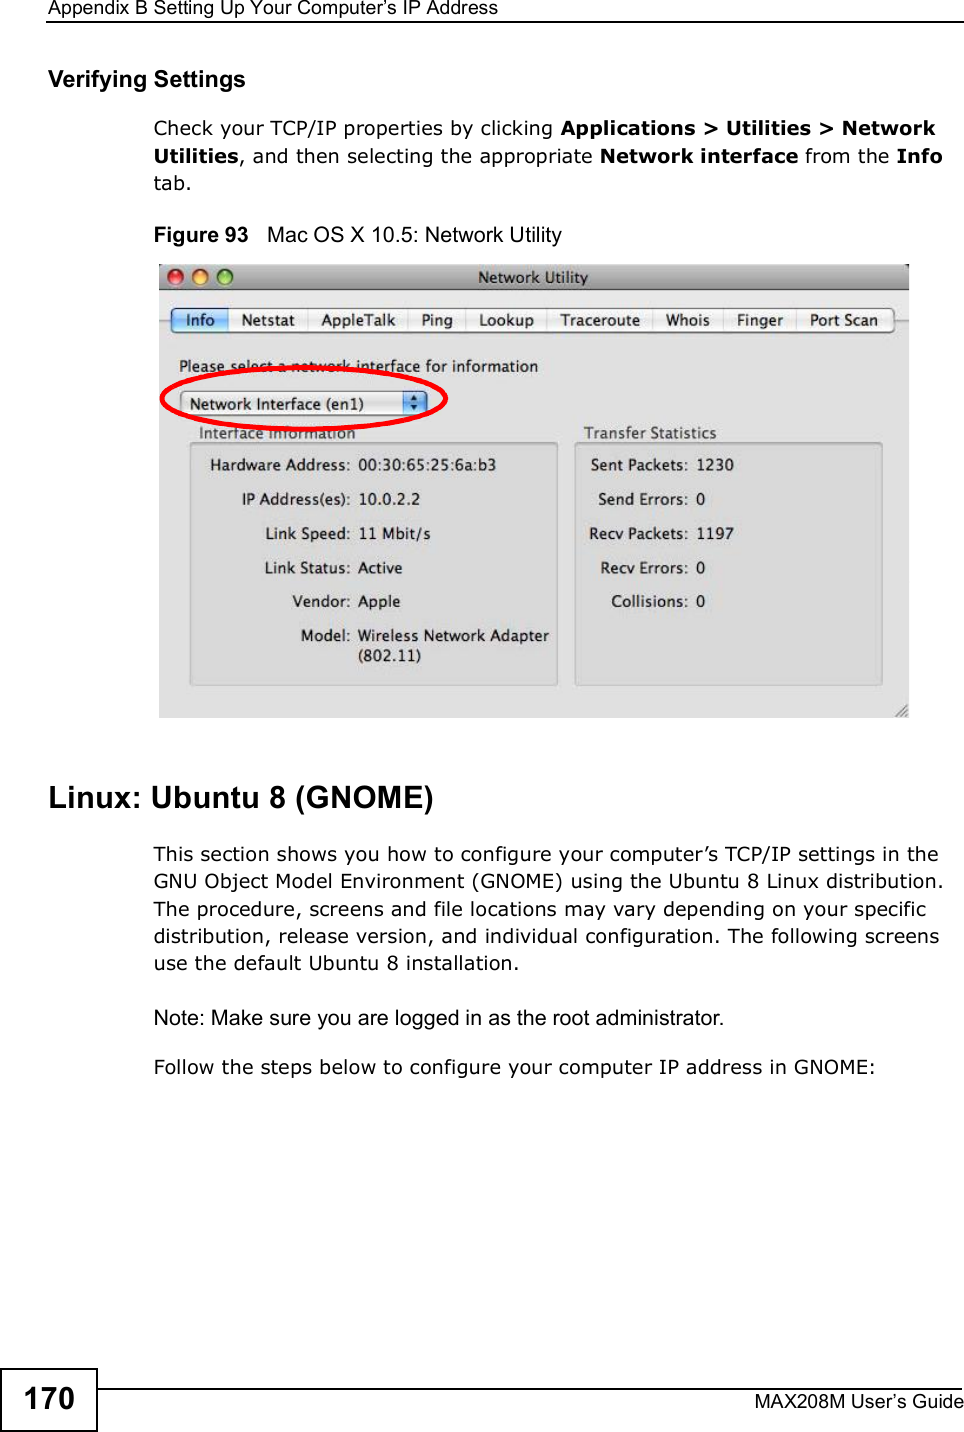 Appendix BSetting Up Your Computer s IP AddressMAX208M User s Guide170Verifying SettingsCheck your TCP/IP properties by clicking Applications &gt; Utilities &gt; Network Utilities, and then selecting the appropriate Network interface from the Info tab.Figure 93   Mac OS X 10.5: Network UtilityLinux: Ubuntu 8 (GNOME)This section shows you how to configure your computer s TCP/IP settings in the GNU Object Model Environment (GNOME) using the Ubuntu 8 Linux distribution. The procedure, screens and file locations may vary depending on your specific distribution, release version, and individual configuration. The following screens use the default Ubuntu 8 installation.Note: Make sure you are logged in as the root administrator. Follow the steps below to configure your computer IP address in GNOME: 